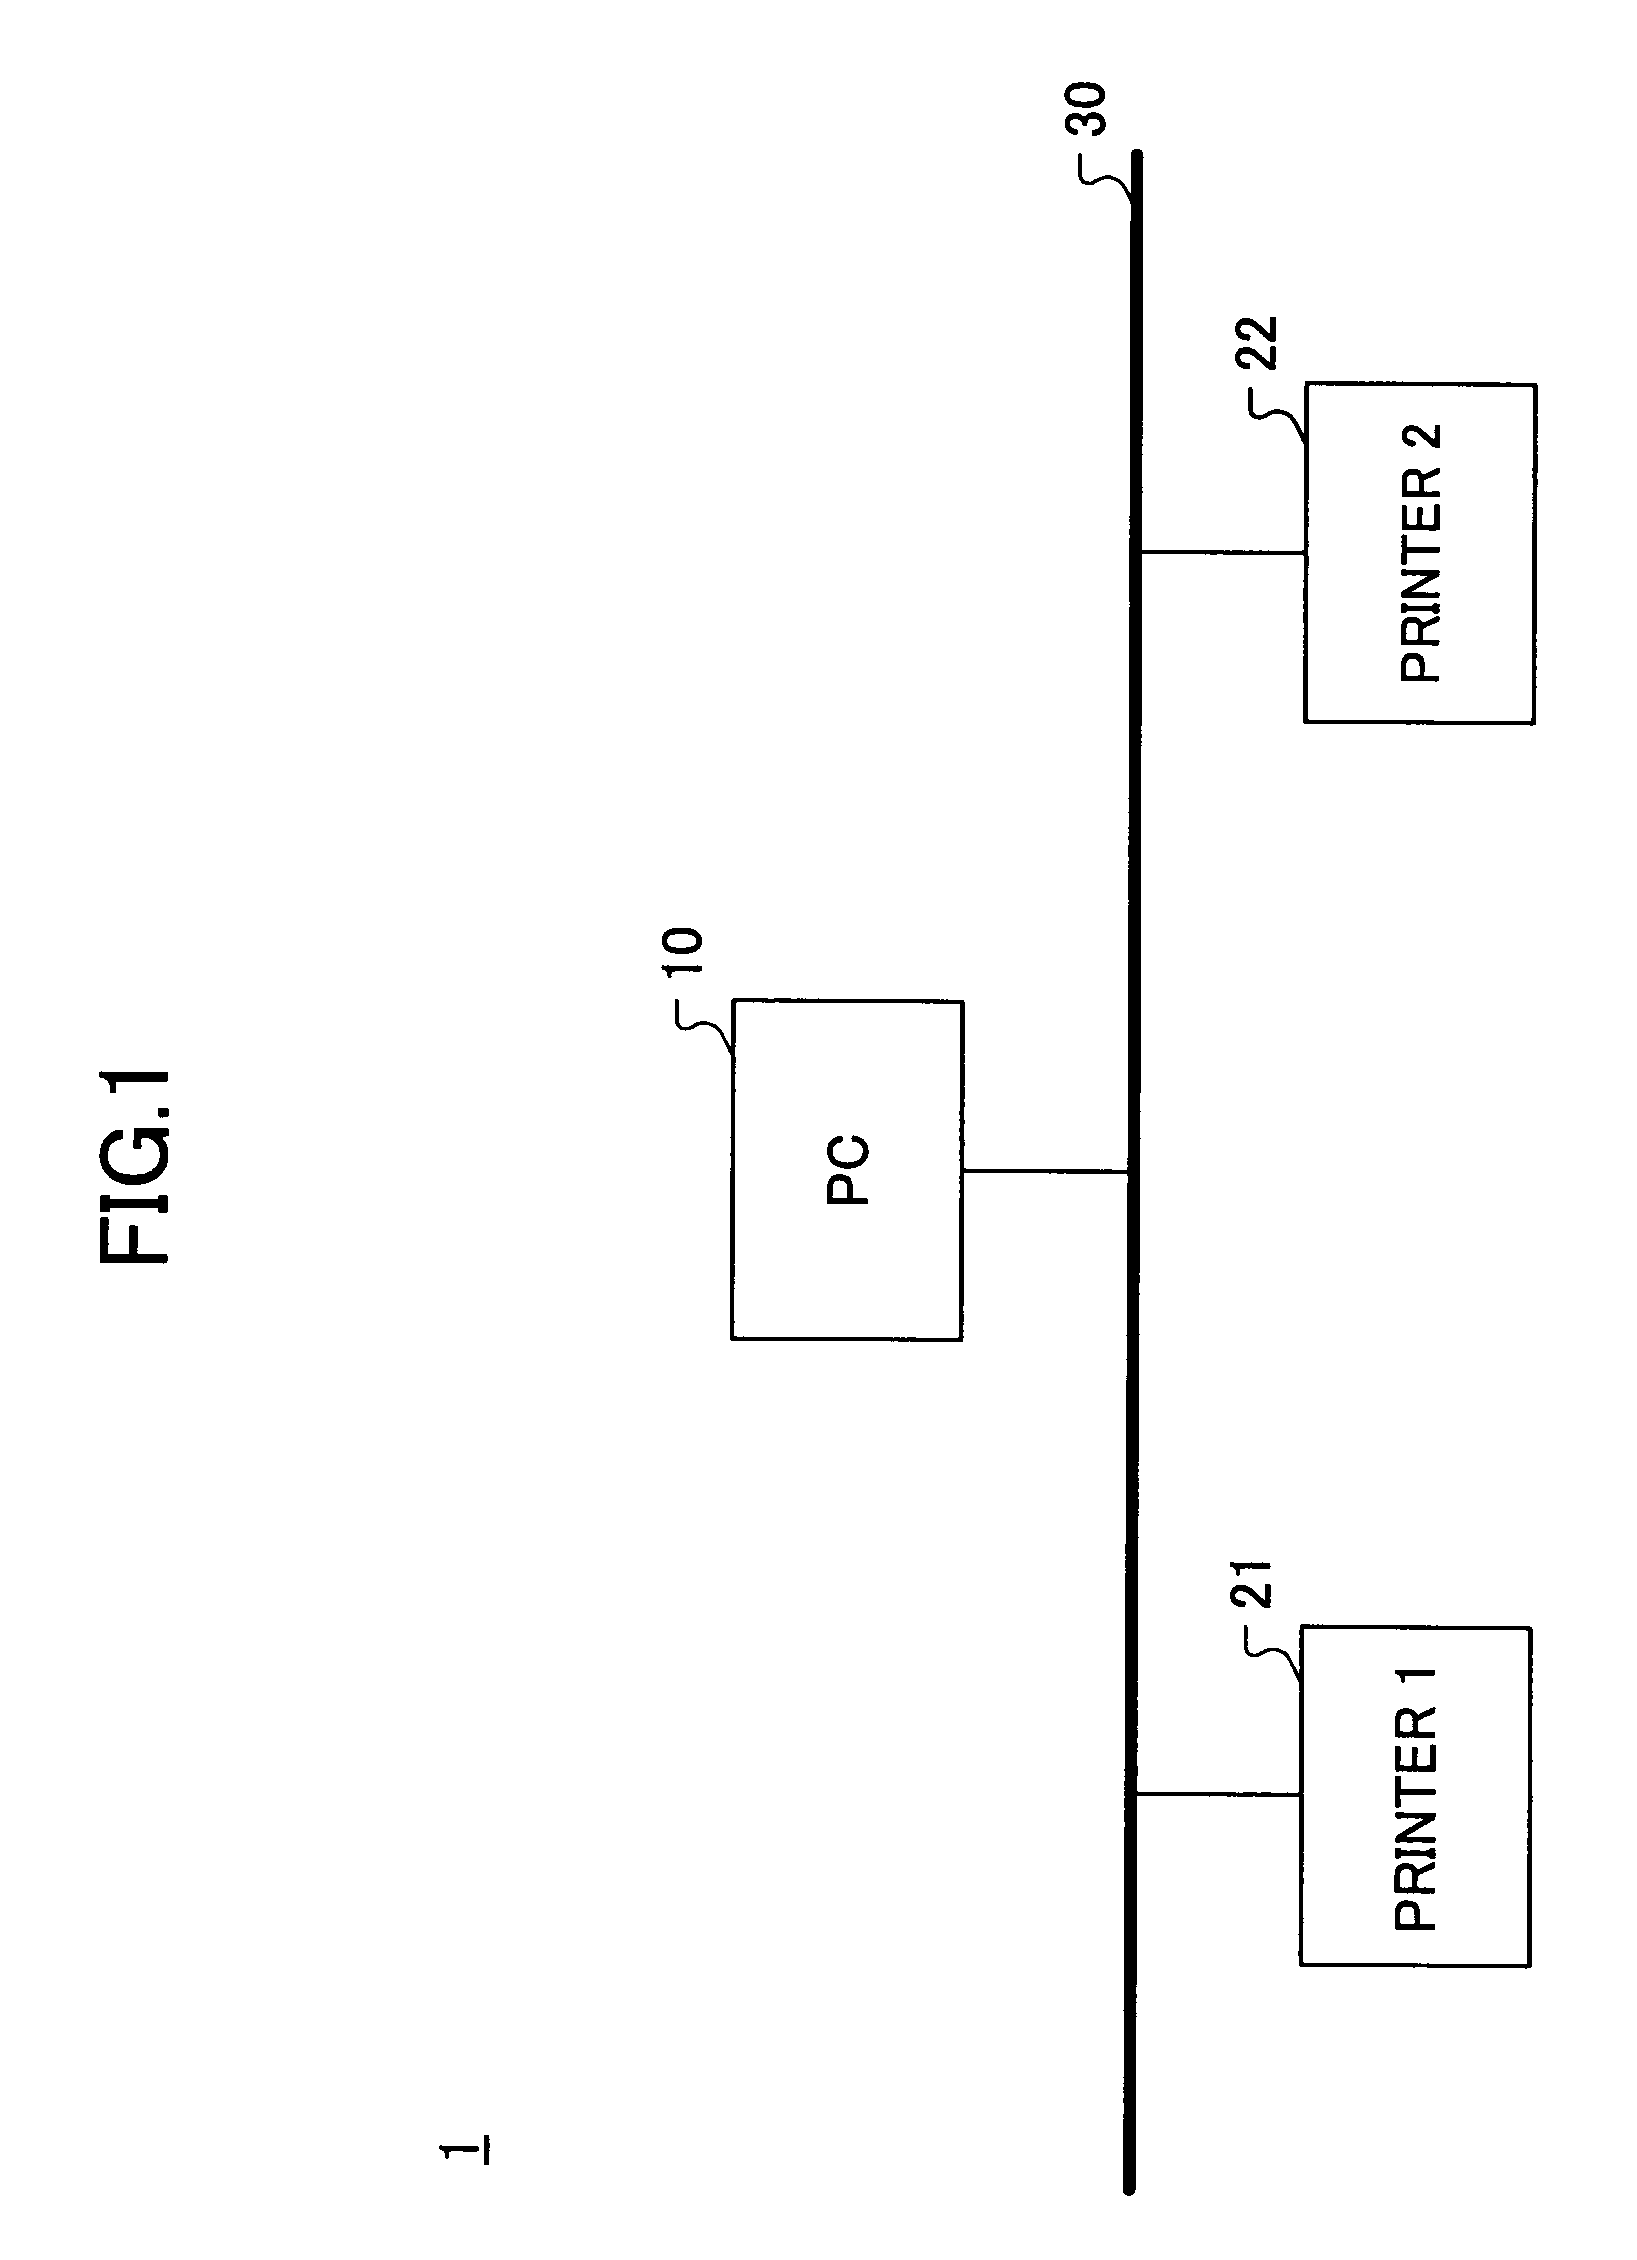 Information processing apparatus, program product, and recording medium capable of appropriately executing an output process even when uninterpretable information is included in output setting information